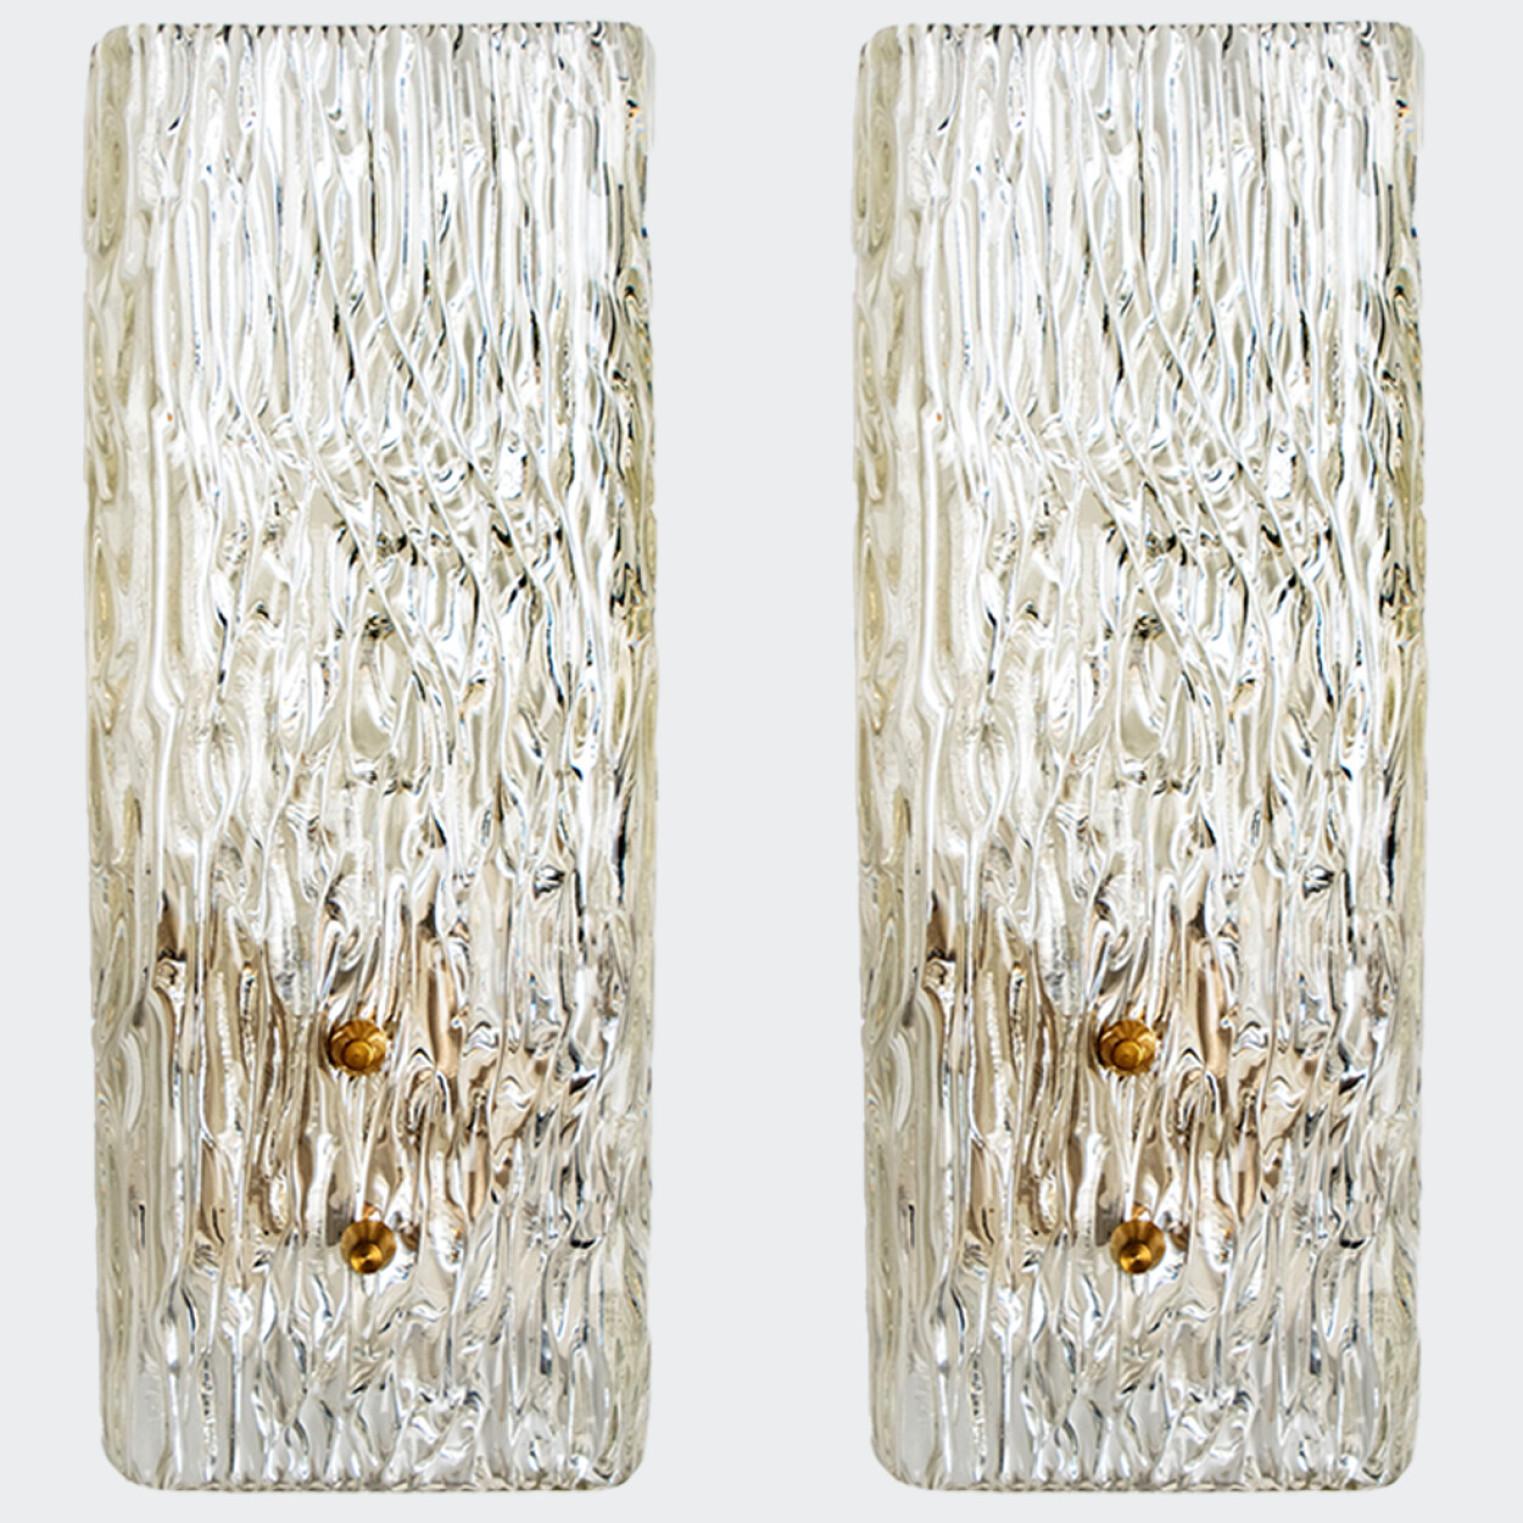 Beautiful and elegant modern brass wall lights or sconces, manufactured by J.T. Kalmar Austria in the 1960s. Lovely design, executed to a very high standard.

Each light has one solid textured glass column on it. Clean lines to complement all